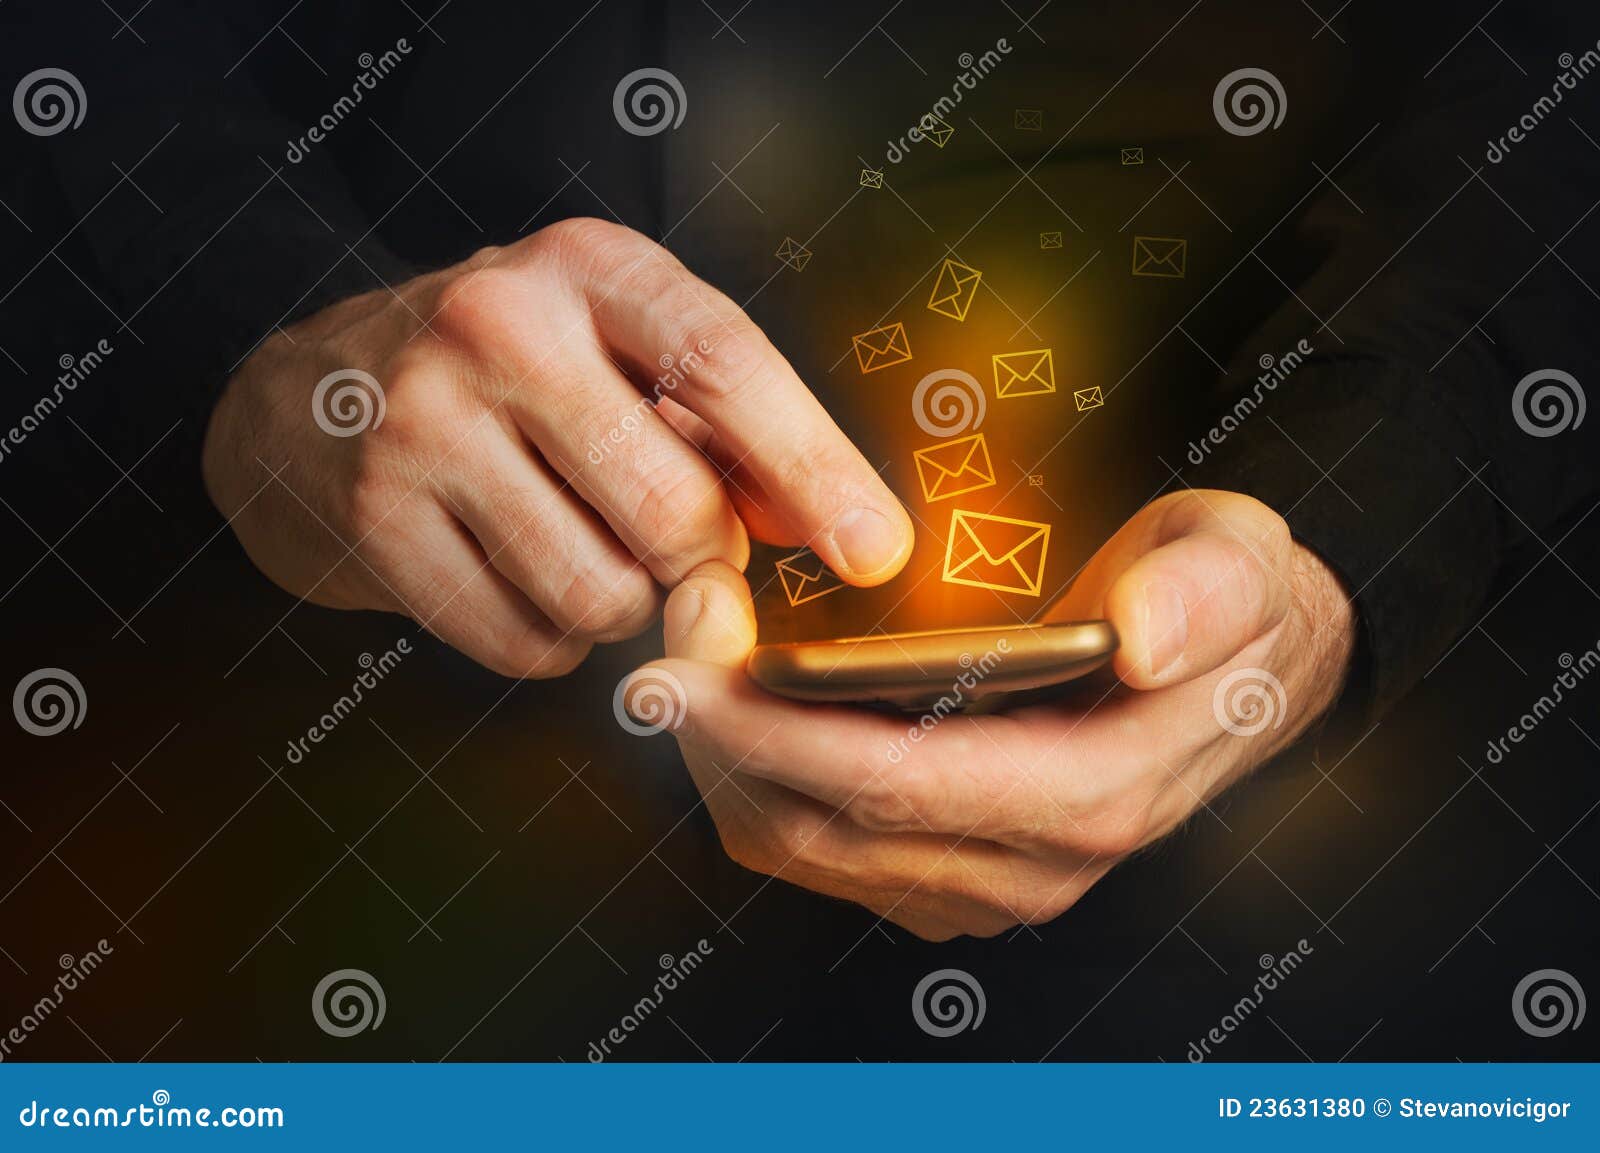 man typing a text message on a smartphone